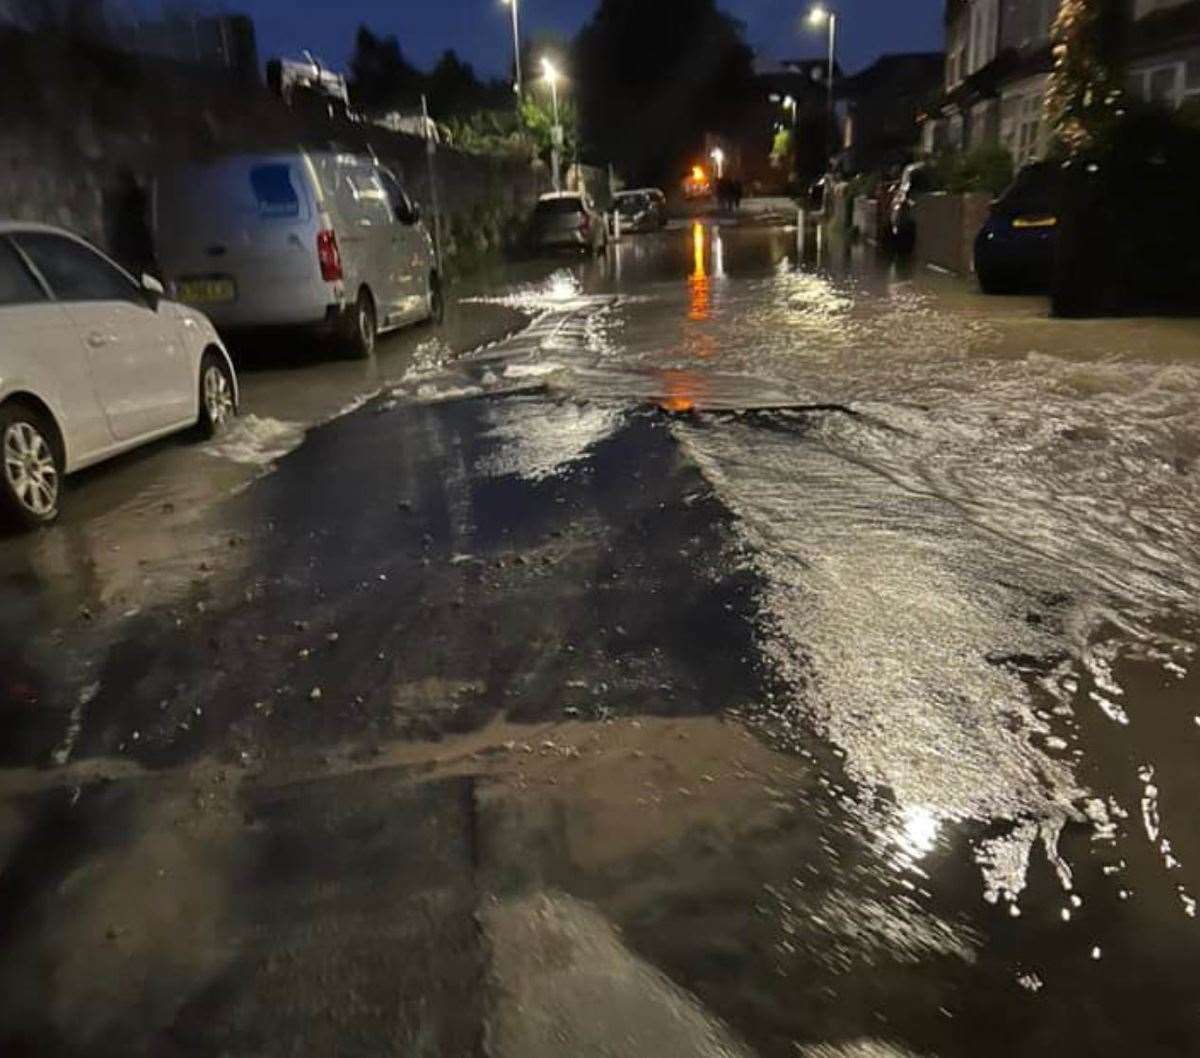 Flooding in Priory Road due to a burst water main. Images: UKNIP